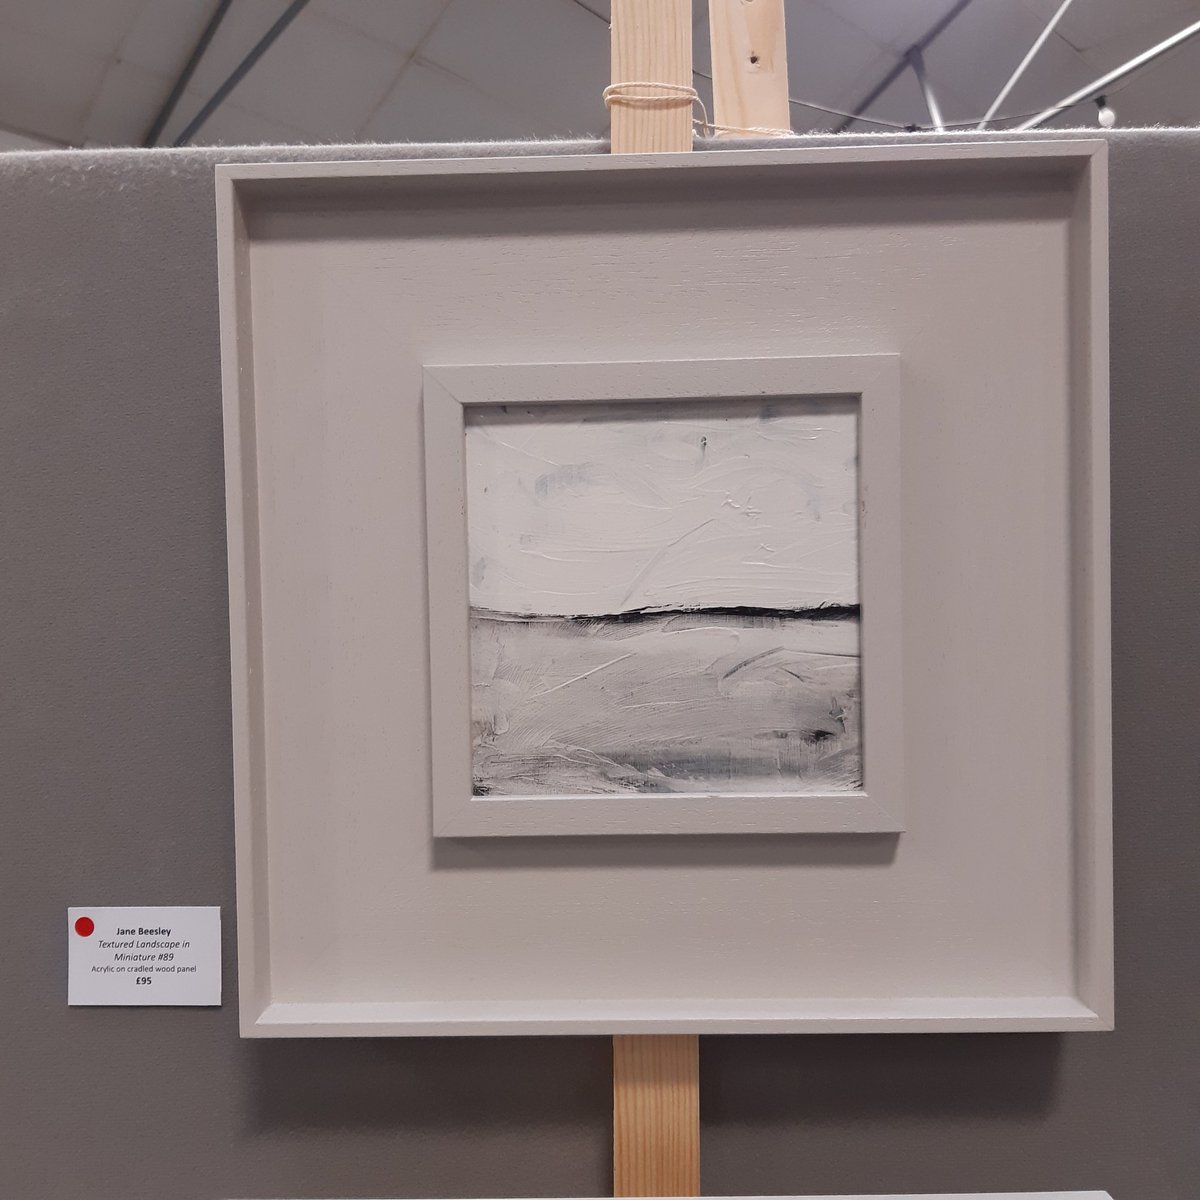 Red dot delight! Sometimes a favourite does sell (artist's joke). 3 still available #bellevueartsfestival artists exhibition at The Barnabas Centre, Coleham Shrewsbury.  Exhibition on till 4pm Saturday 10th